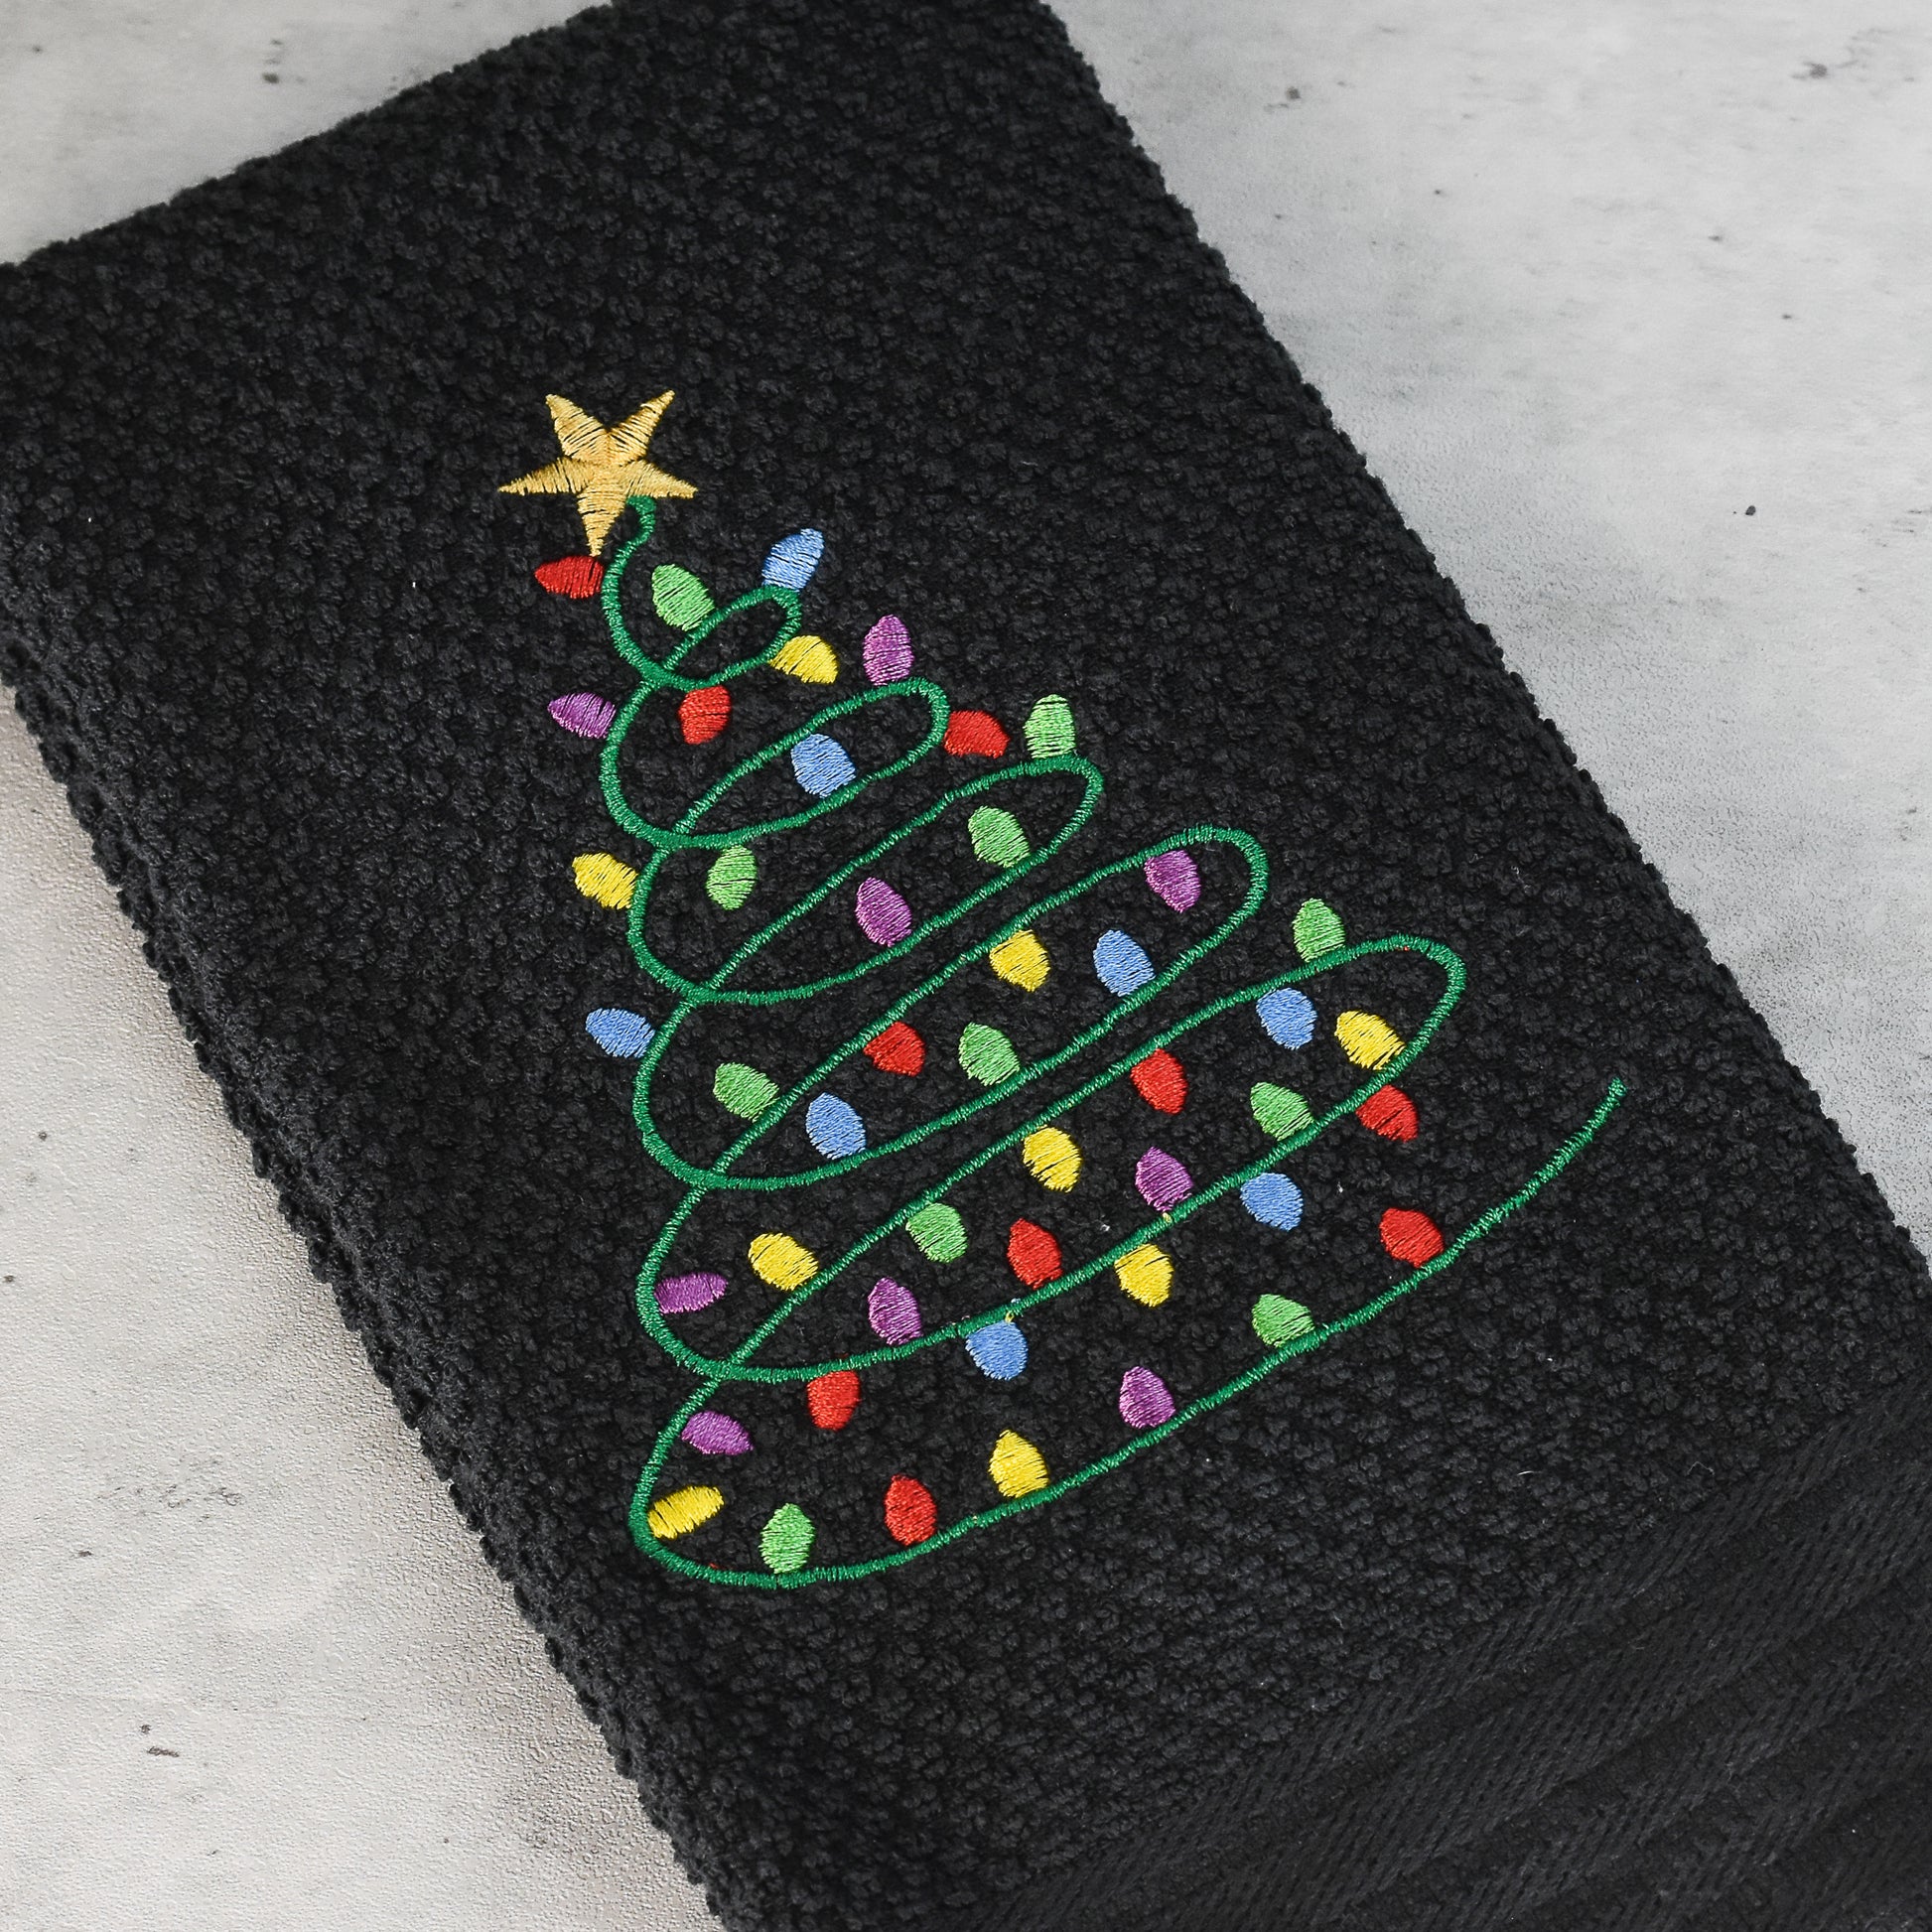 Embroidered Christmas Tree Design with lights on Black 100% cotton waffle weave toweling